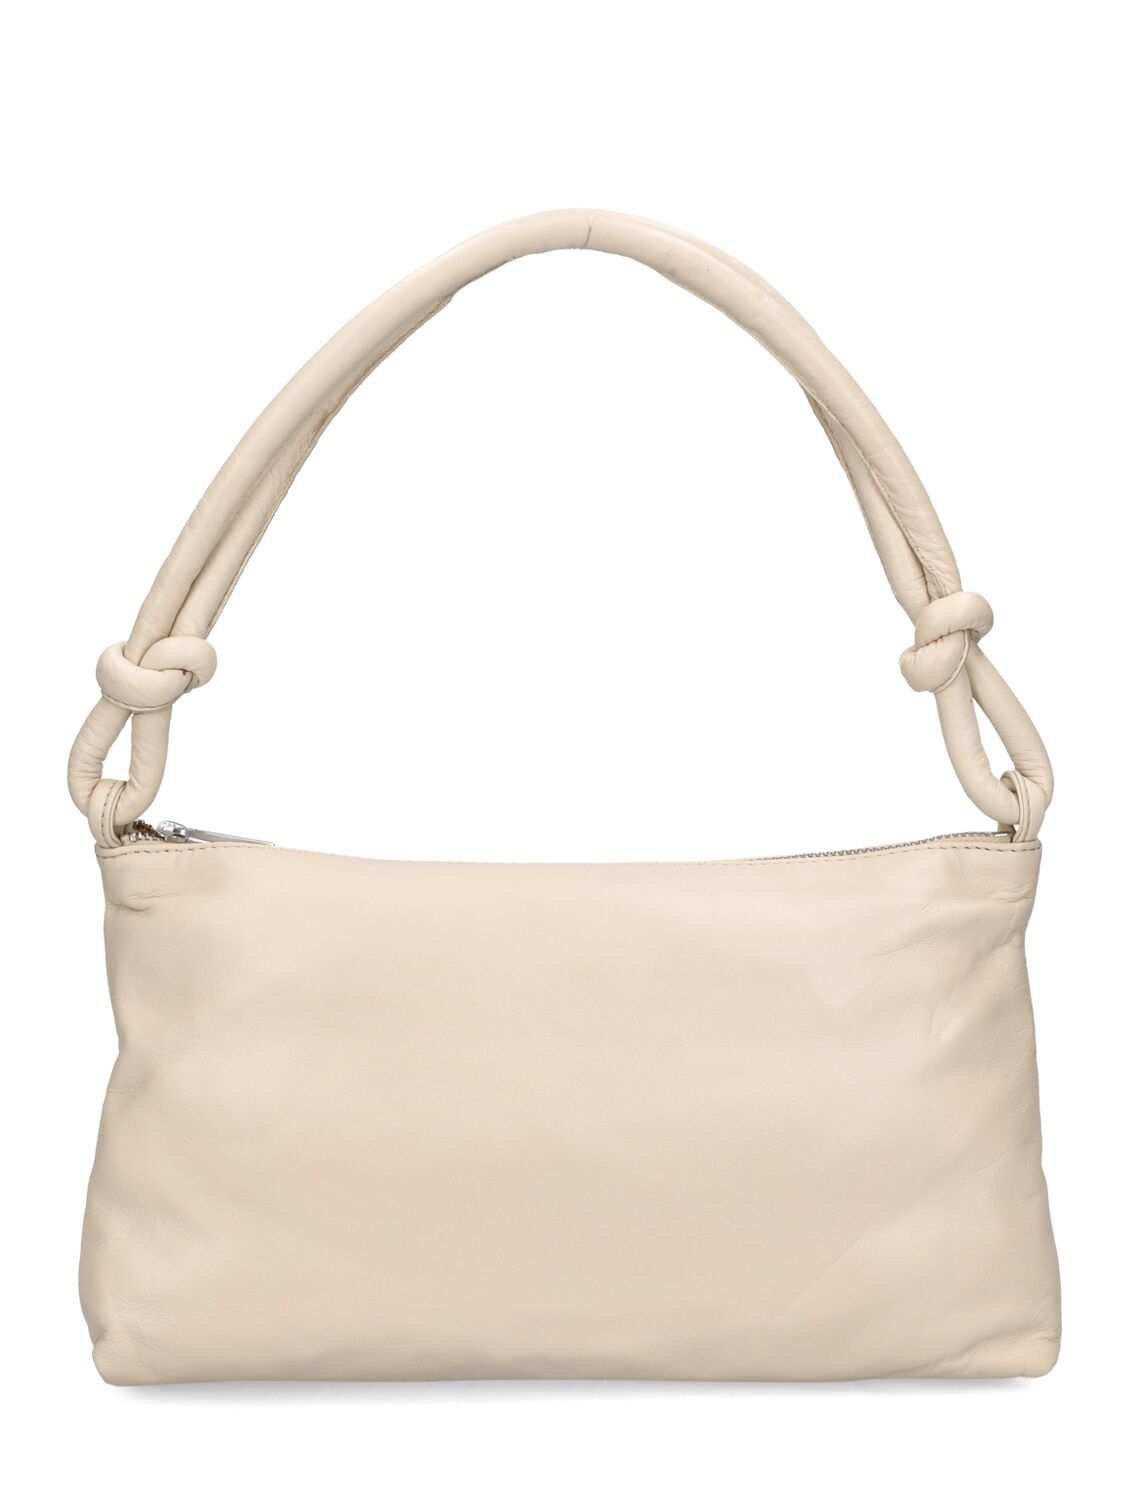 St.agni Knotted Leather Shoulder Bag In Cool White